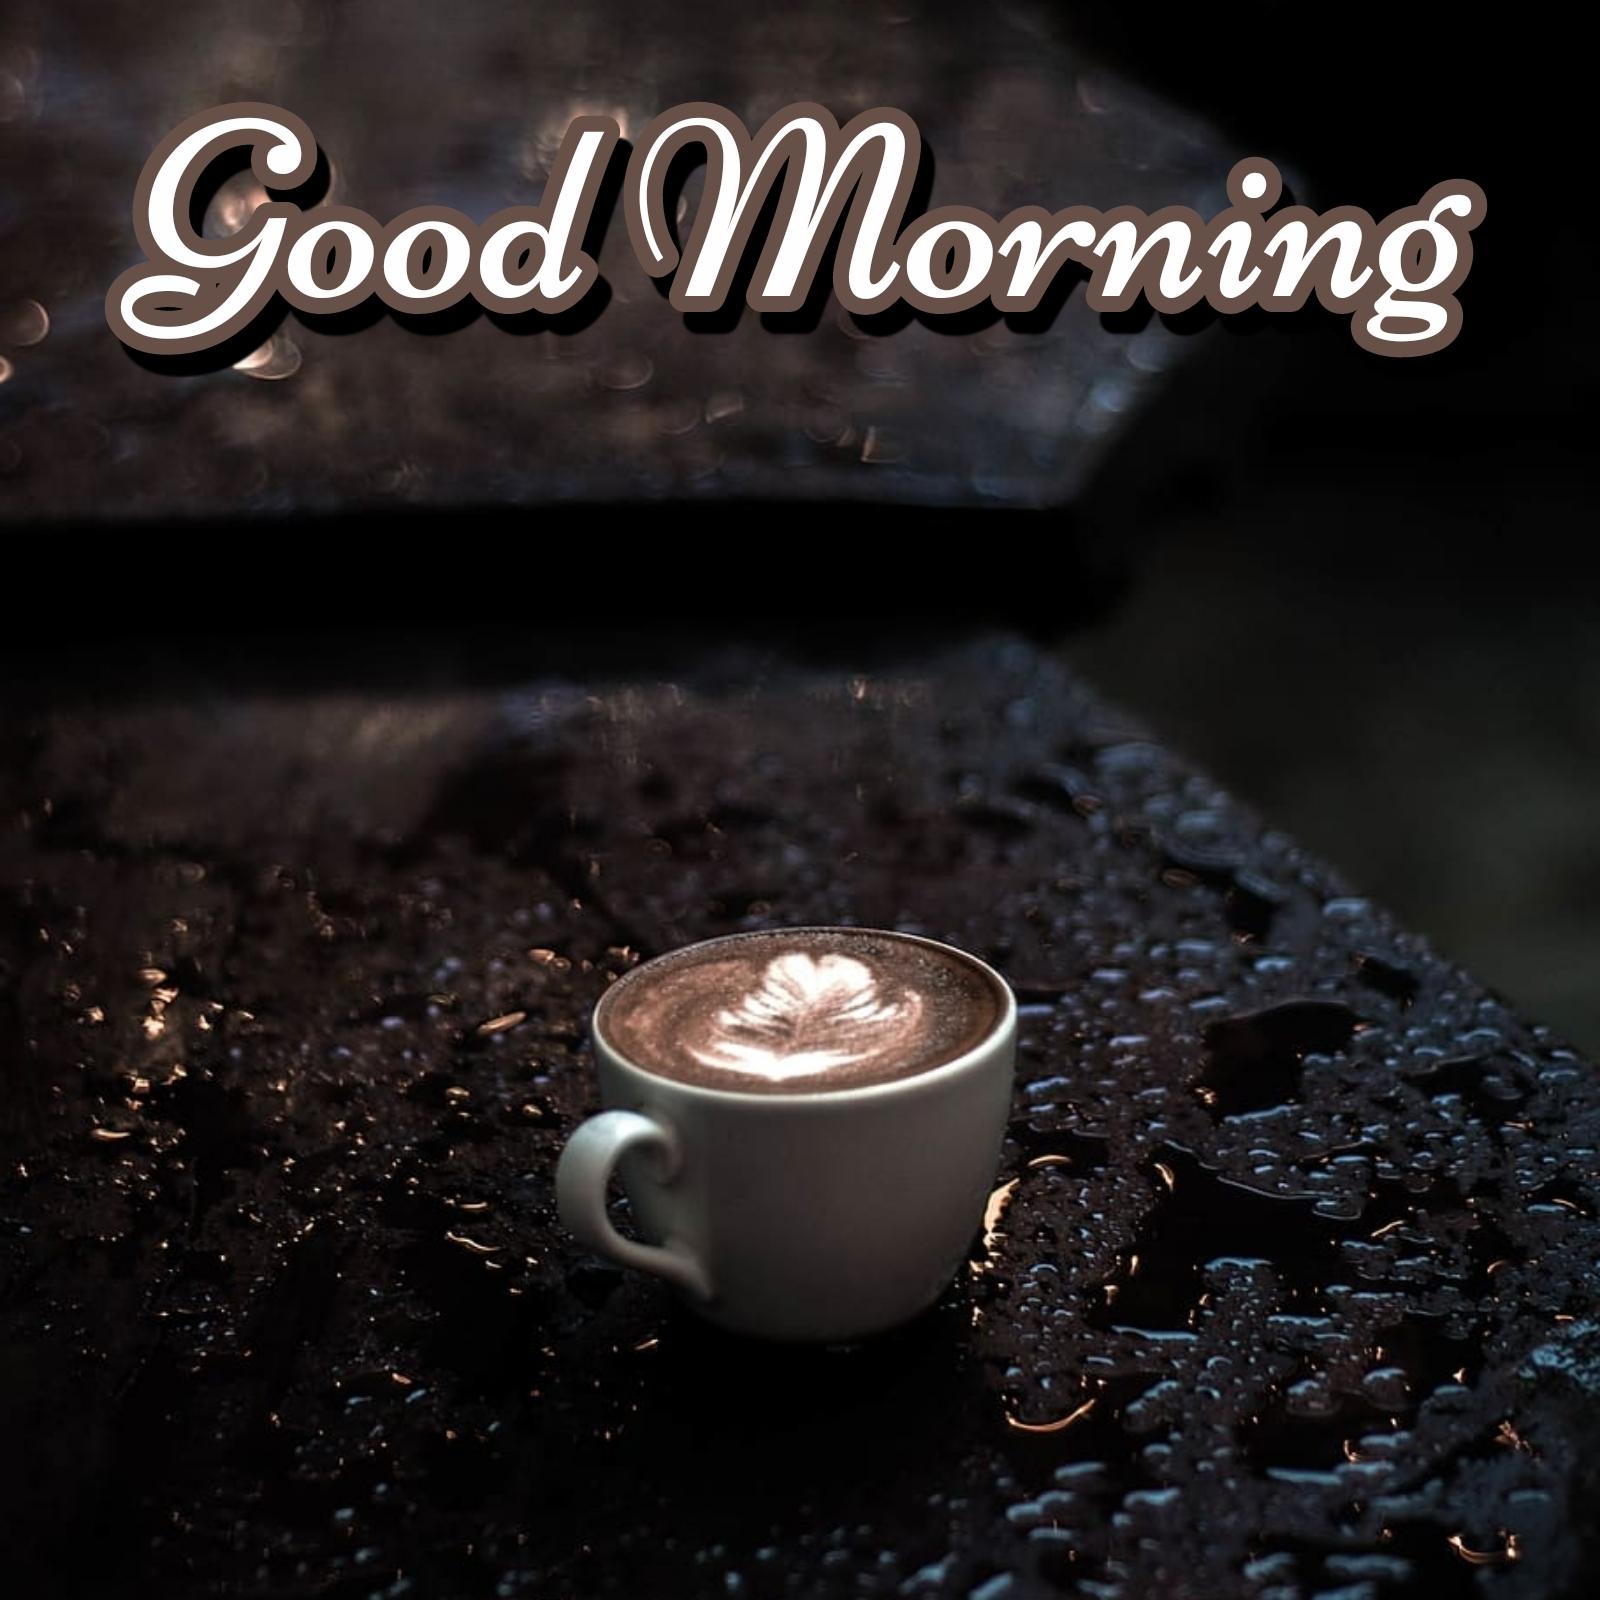 Good Morning Rain Images With Coffee